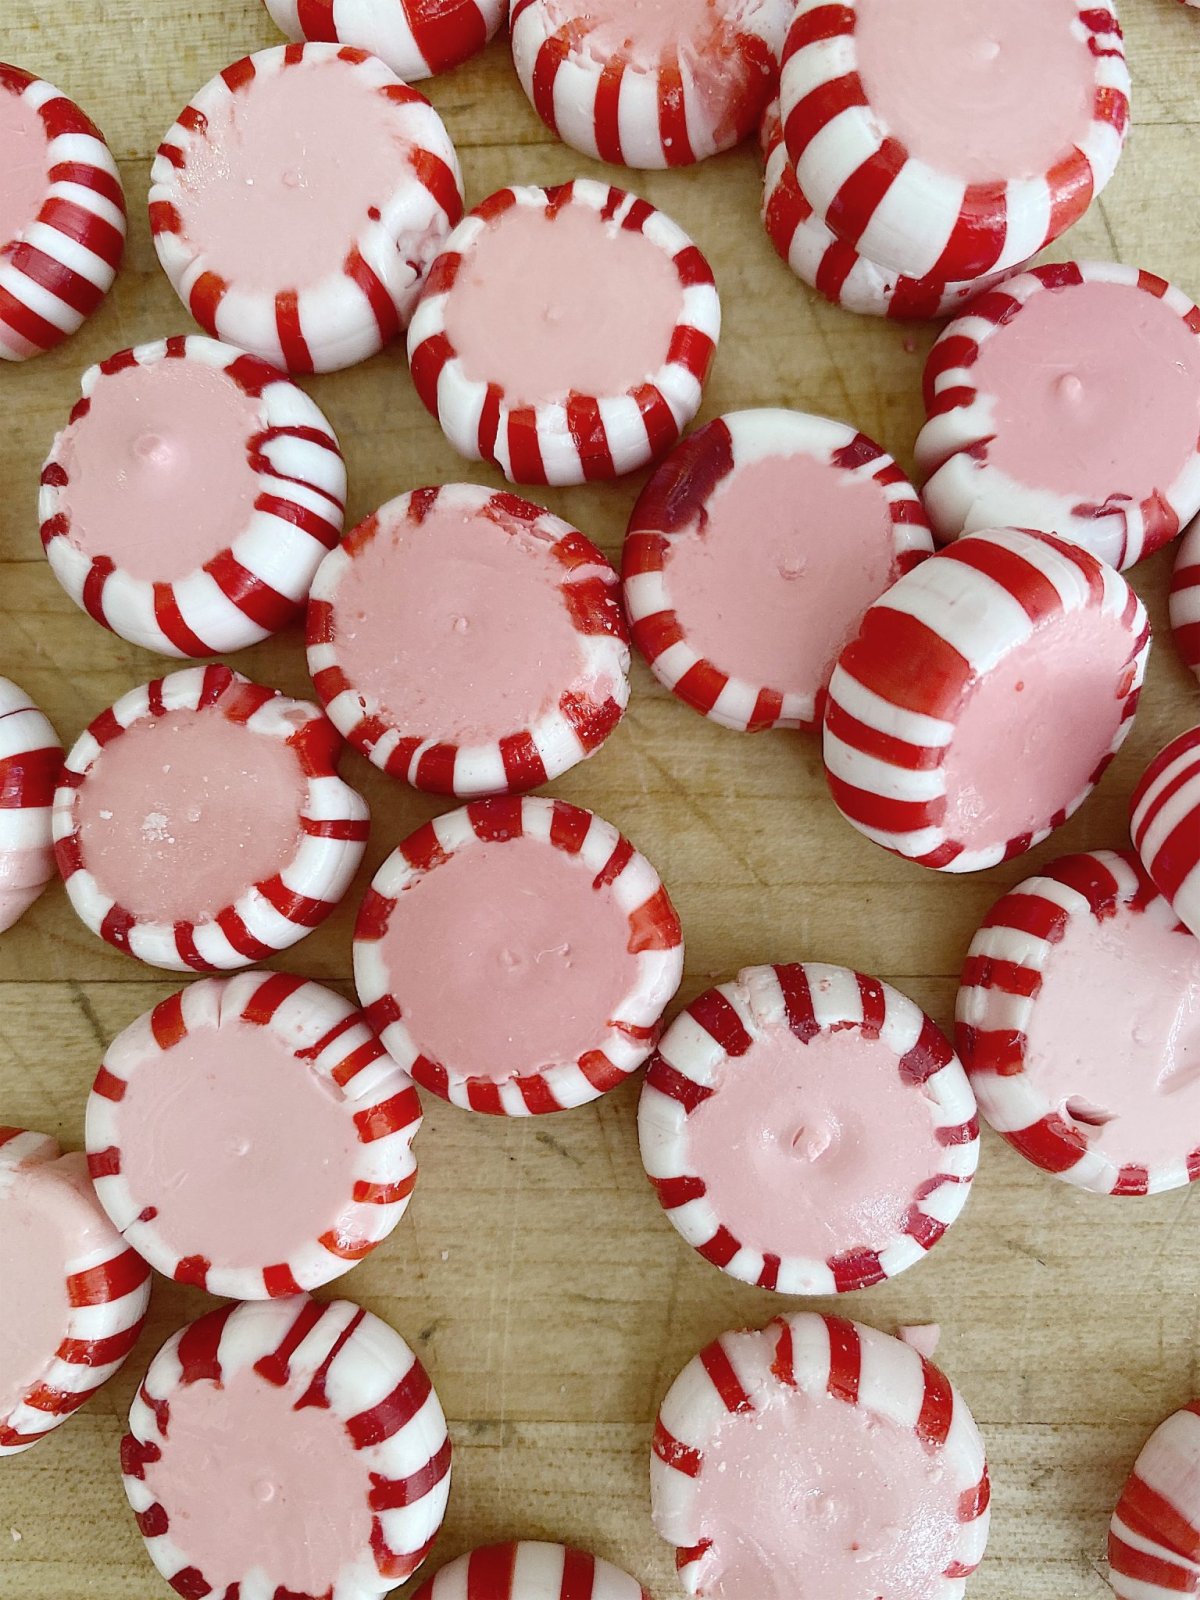 https://my100yearoldhome.com/wp-content/uploads/2020/02/how-to-make-a-candy-peppermint-plate-5-scaled.jpg